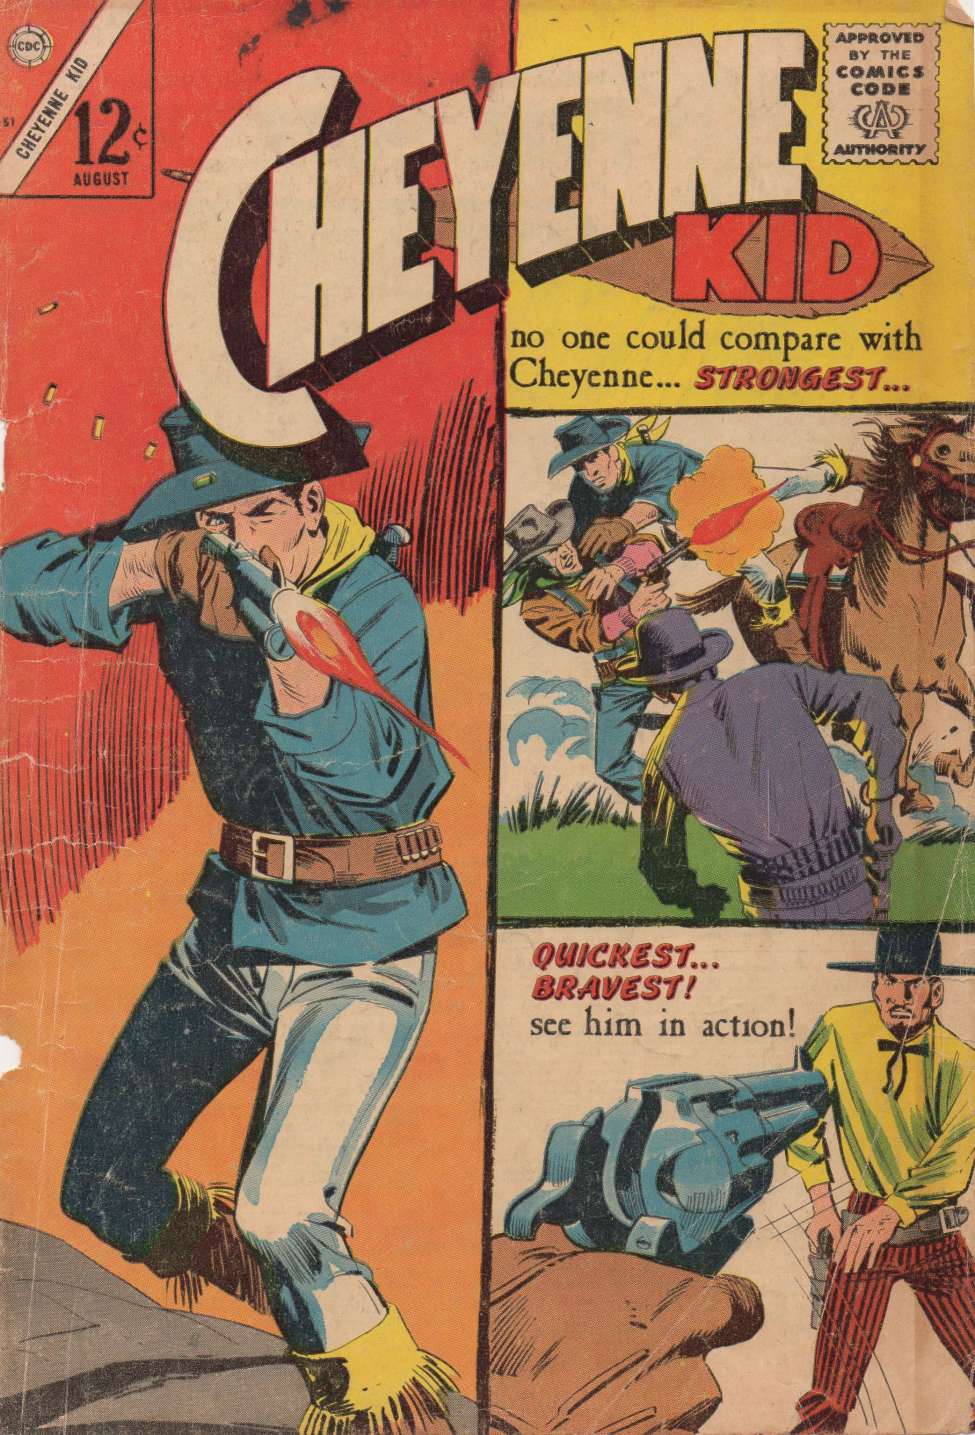 Book Cover For Cheyenne Kid 51